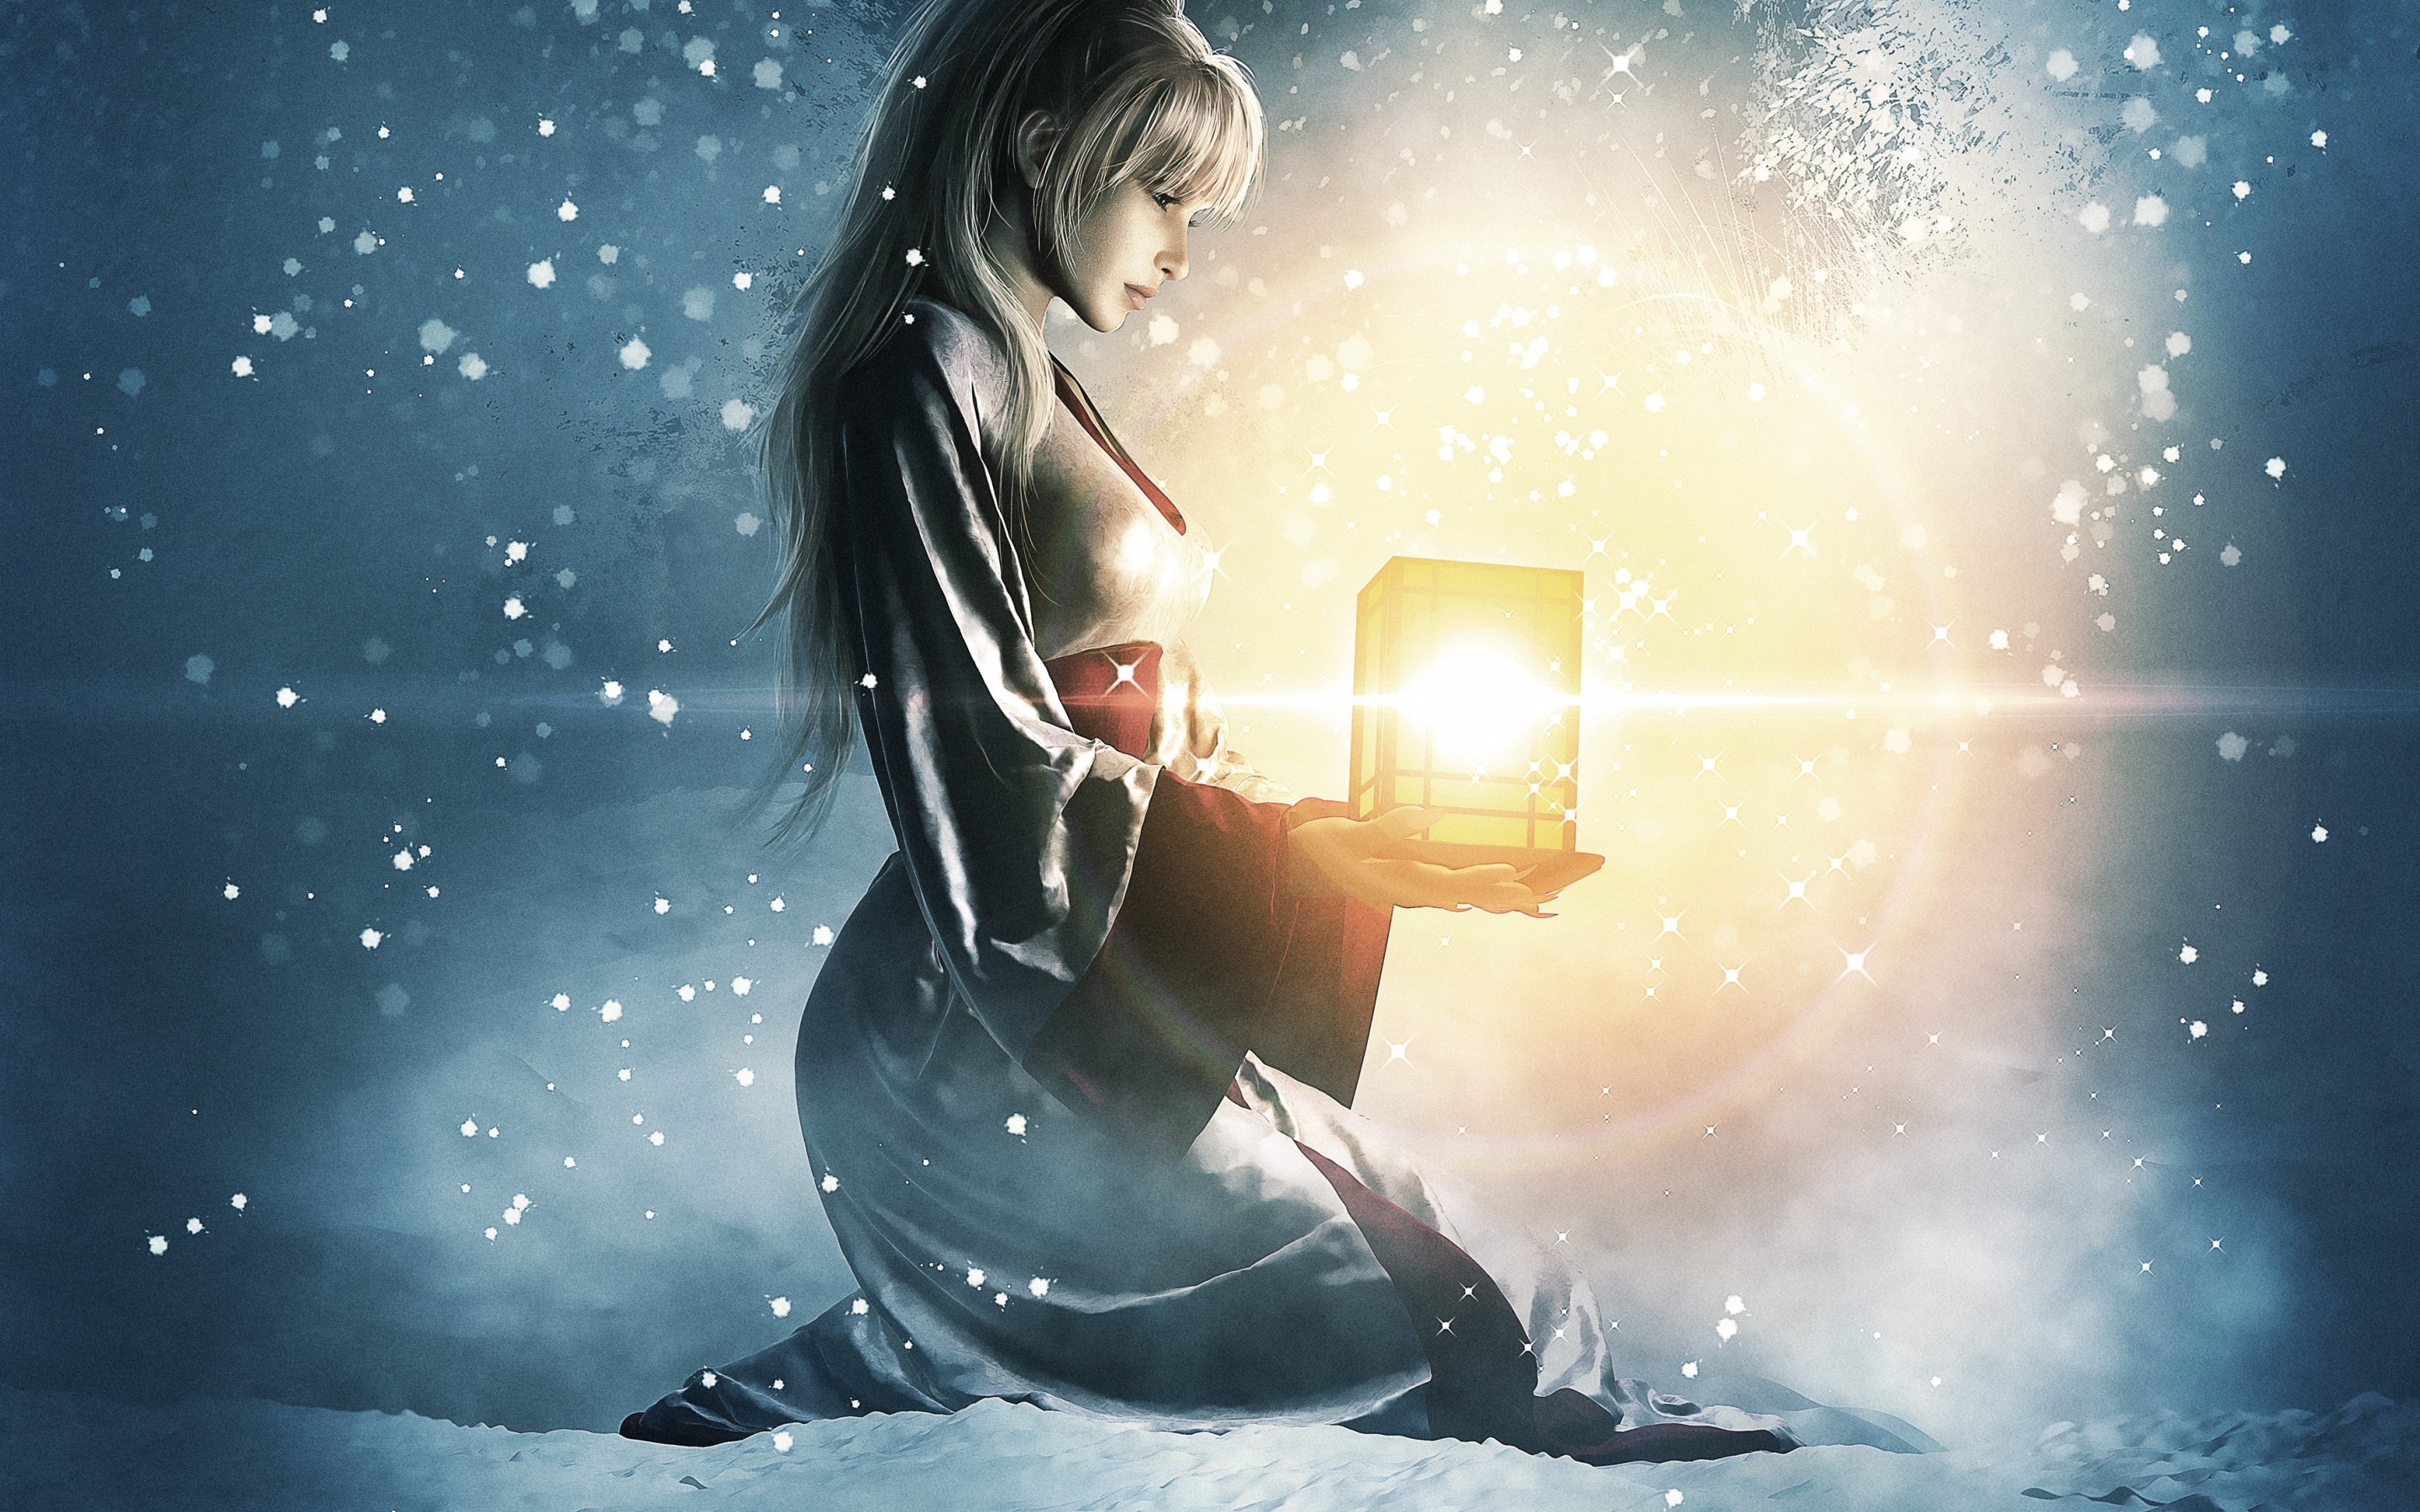 The Lady With The Lamp HD Wallpaper. Background Imagex1800